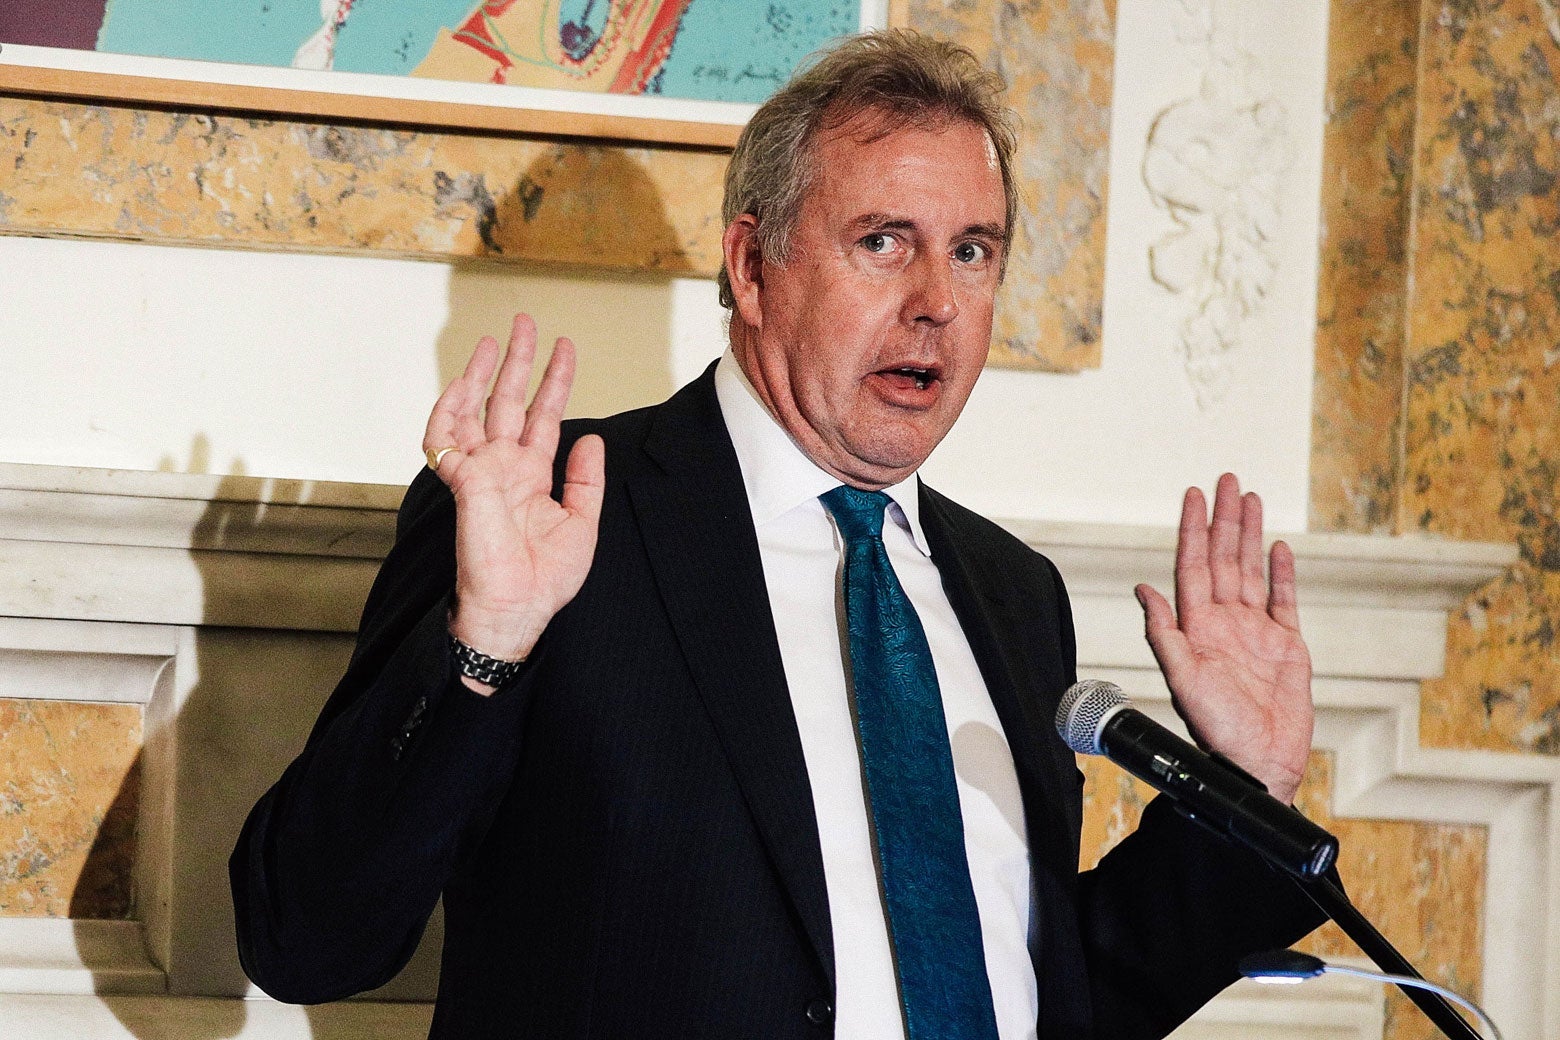 Darroch holds up his hands mid-speech at a podium.